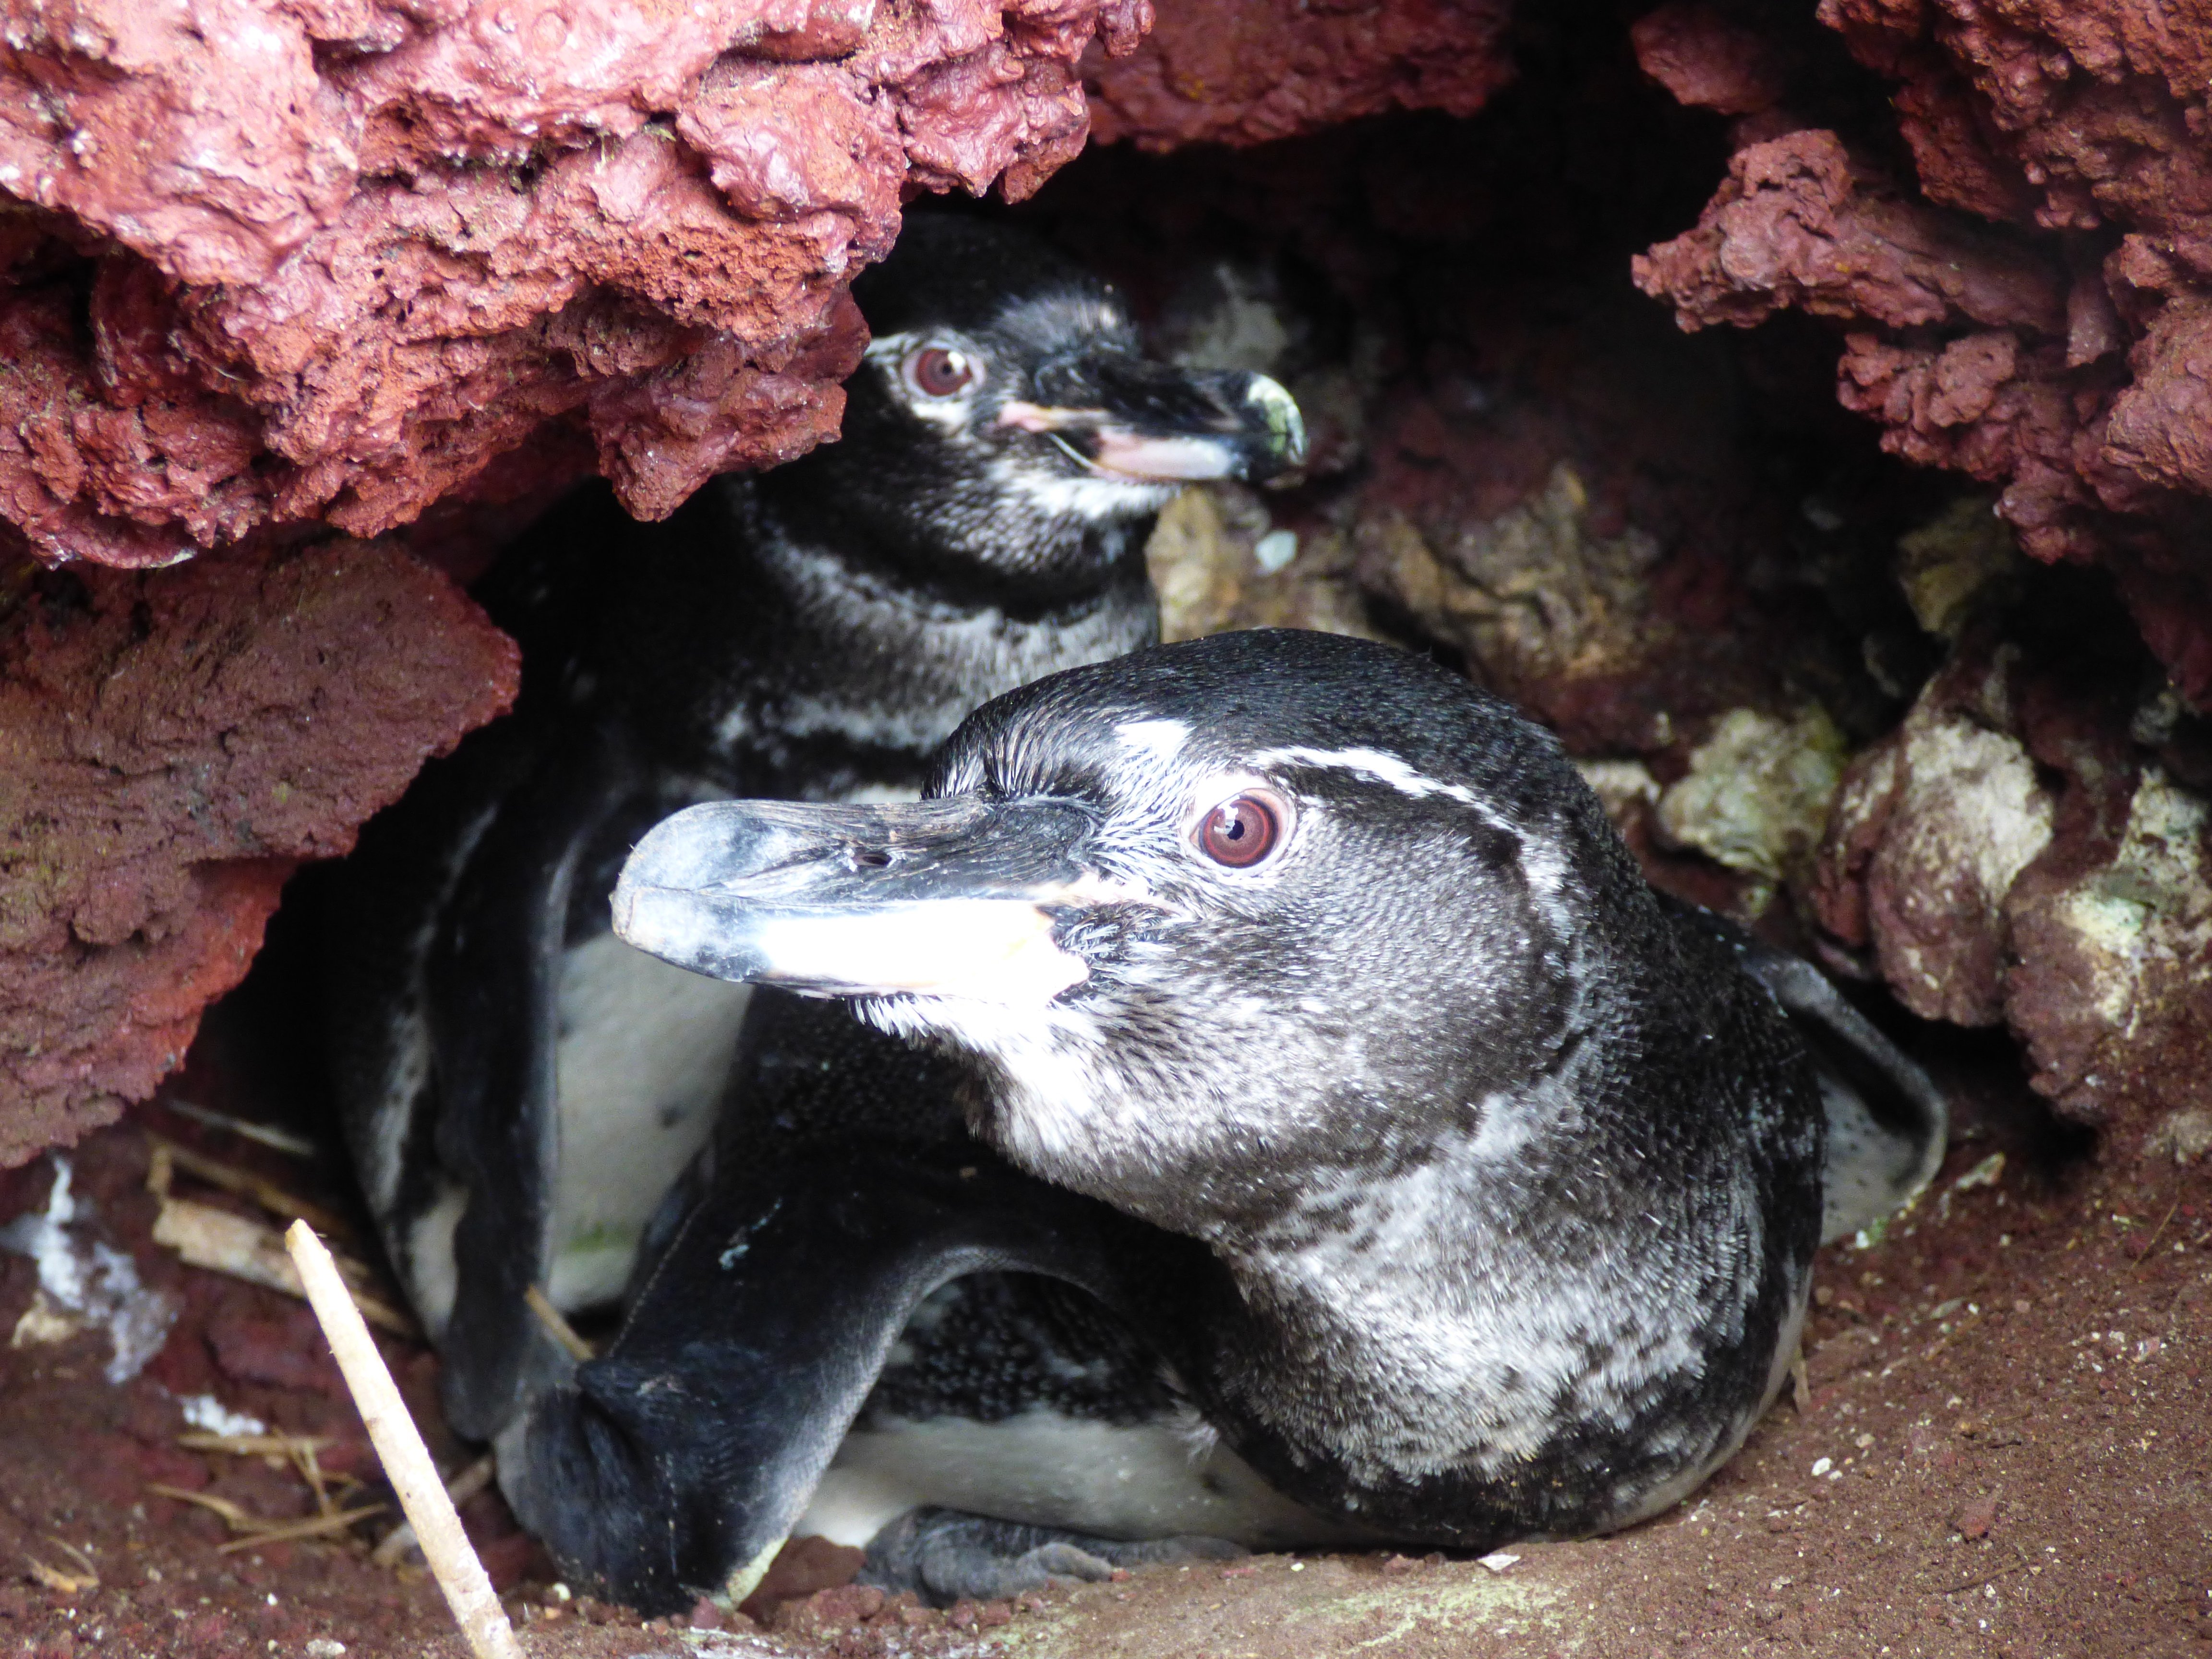 Cappello found that the beaks of male Galápagos penguins — measured from top to bottom — were slightly thicker than female beaks. Beak size alone could correctly determine the sex of more than 95 percent of the penguins in her study.P. Dee Boersma